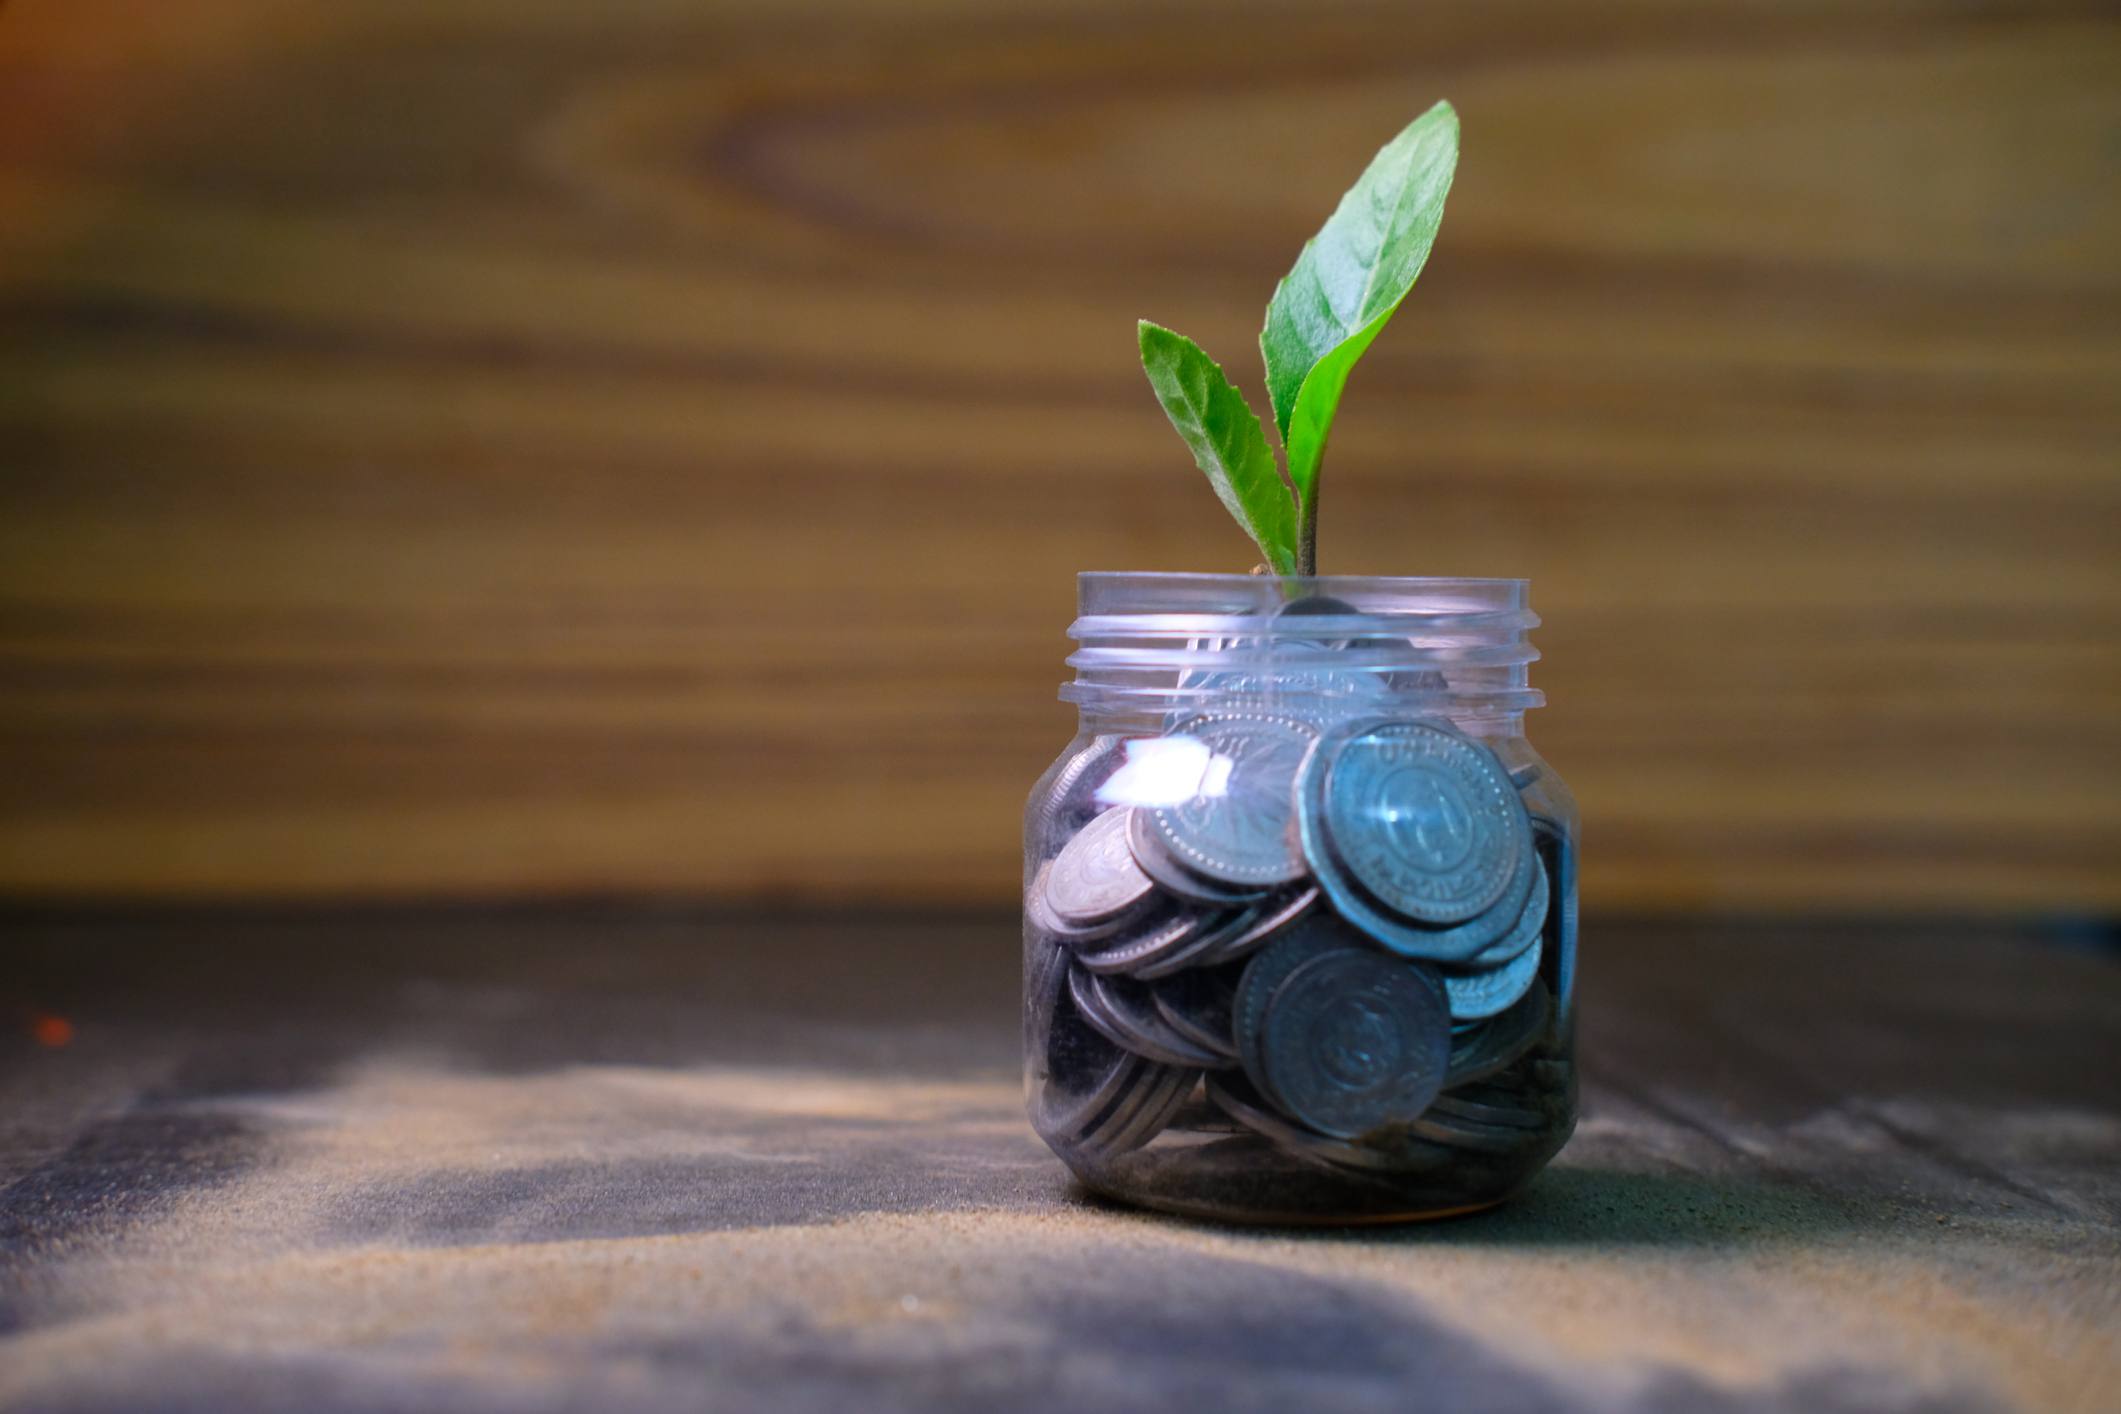 Coins in a bottle and a plant growing with savings money put on the wood.